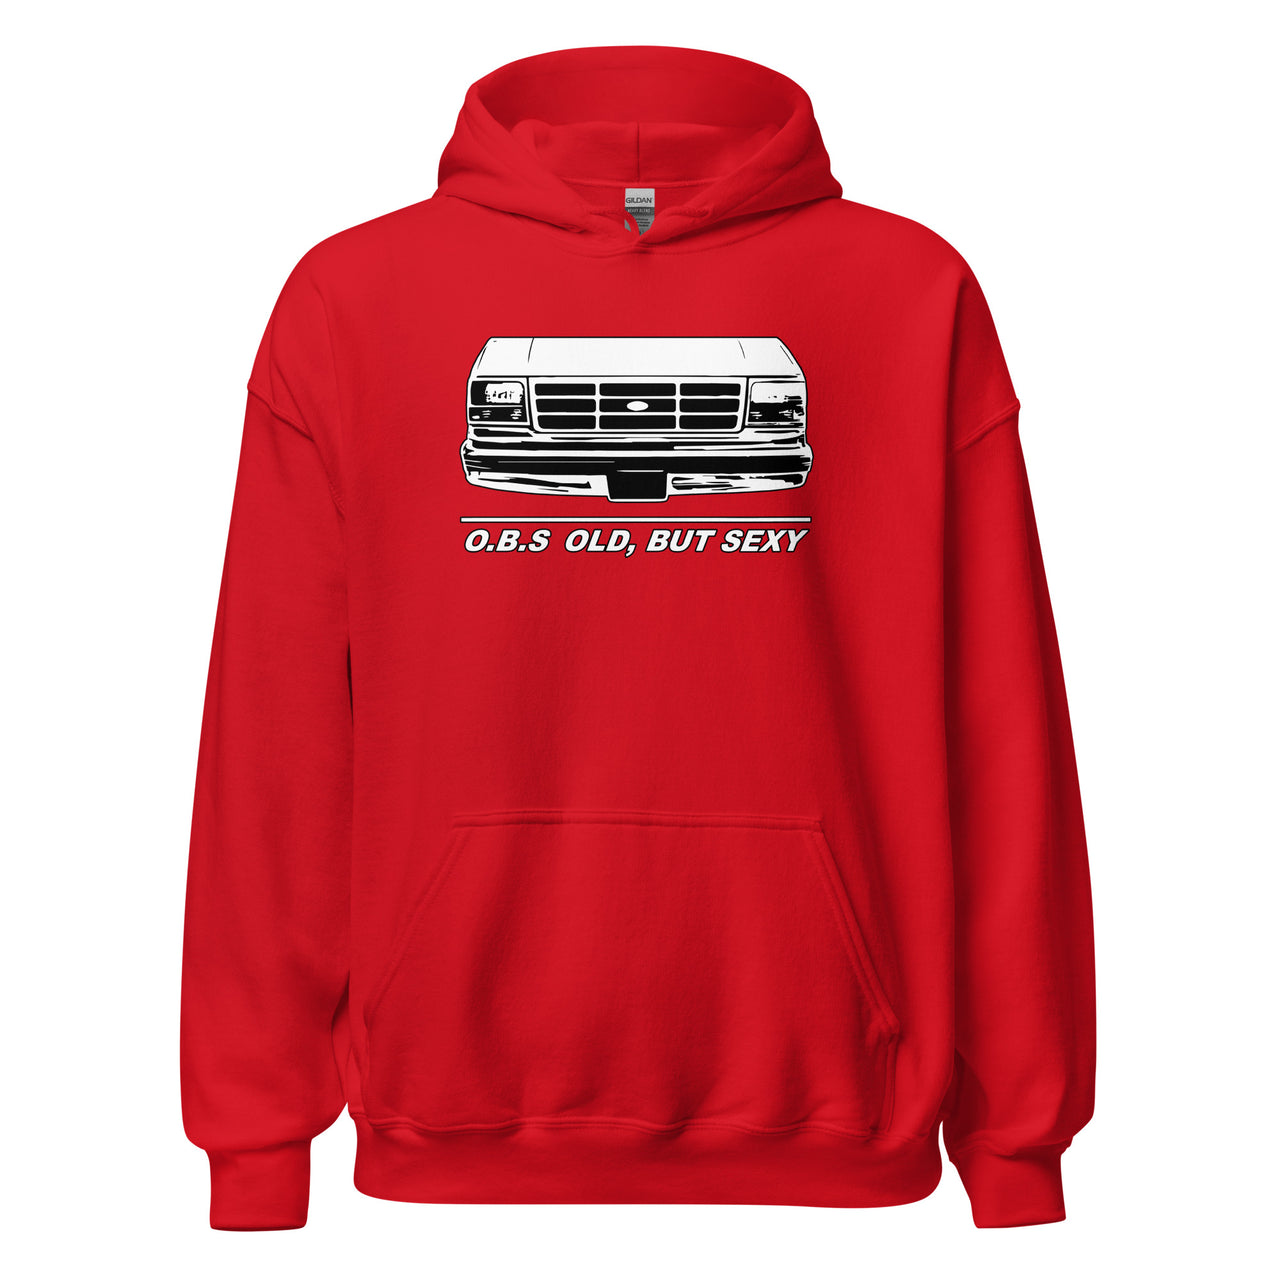 OBS Truck - Old, But Sexy Hoodie in red